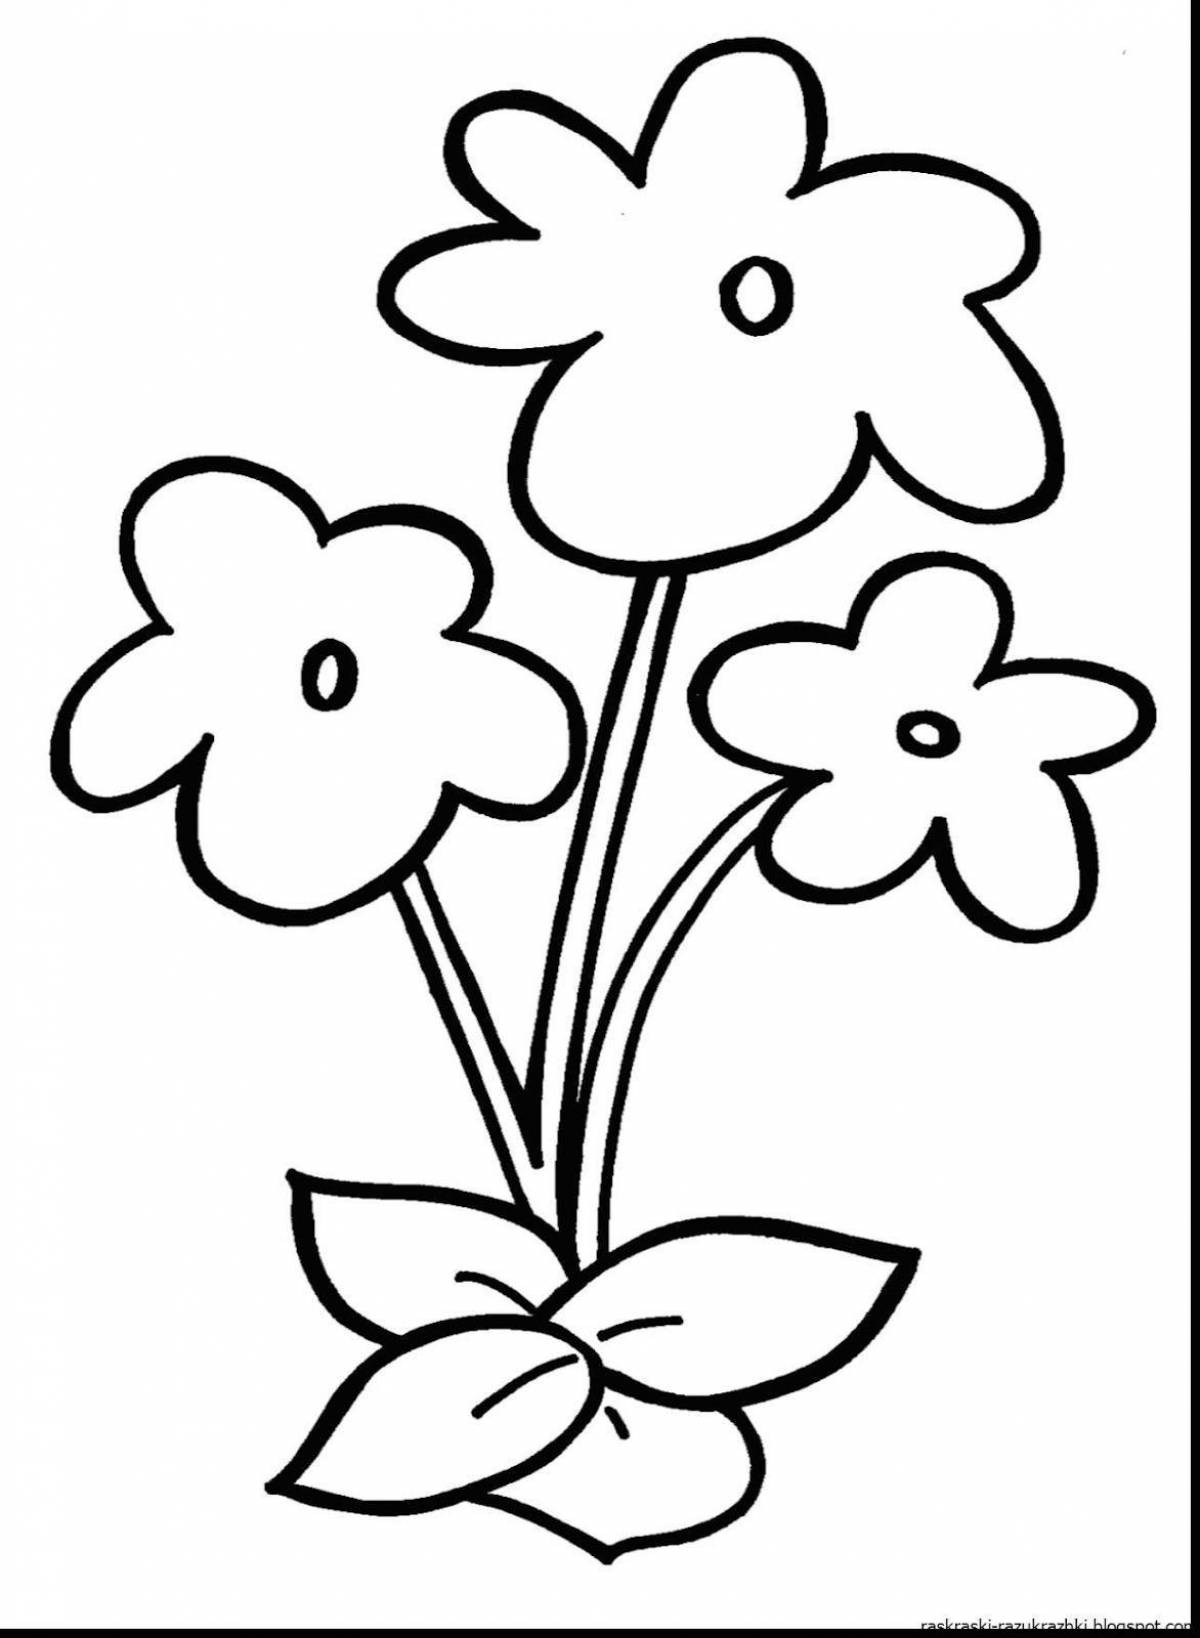 Lovely coloring flowers for kids